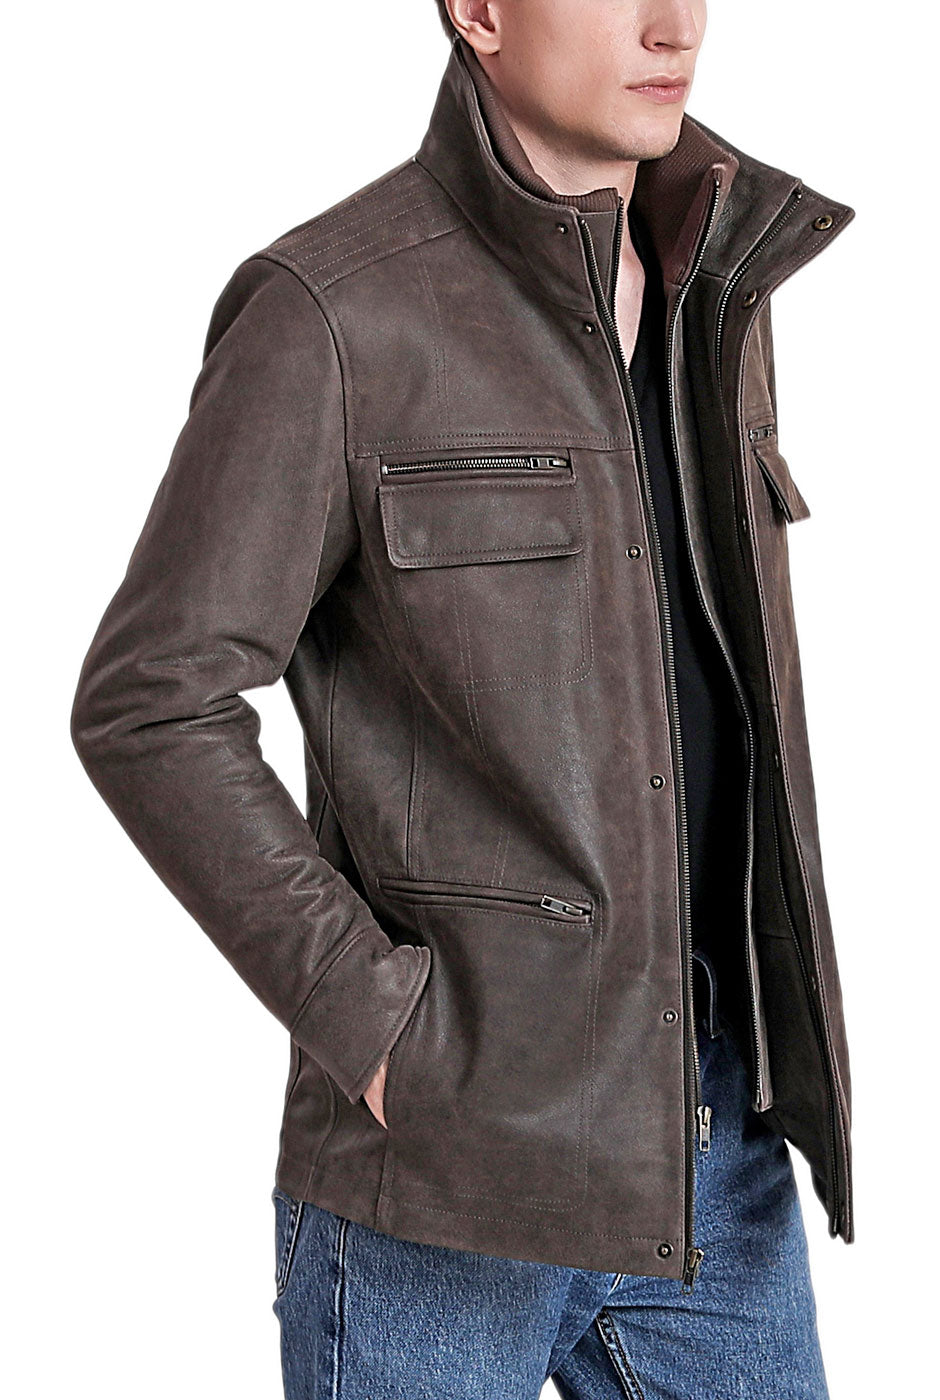 Leather Jacket Men Genuine Leather | Men's Genuine Leather Coat - Brown  Layer Cowhide - Aliexpress